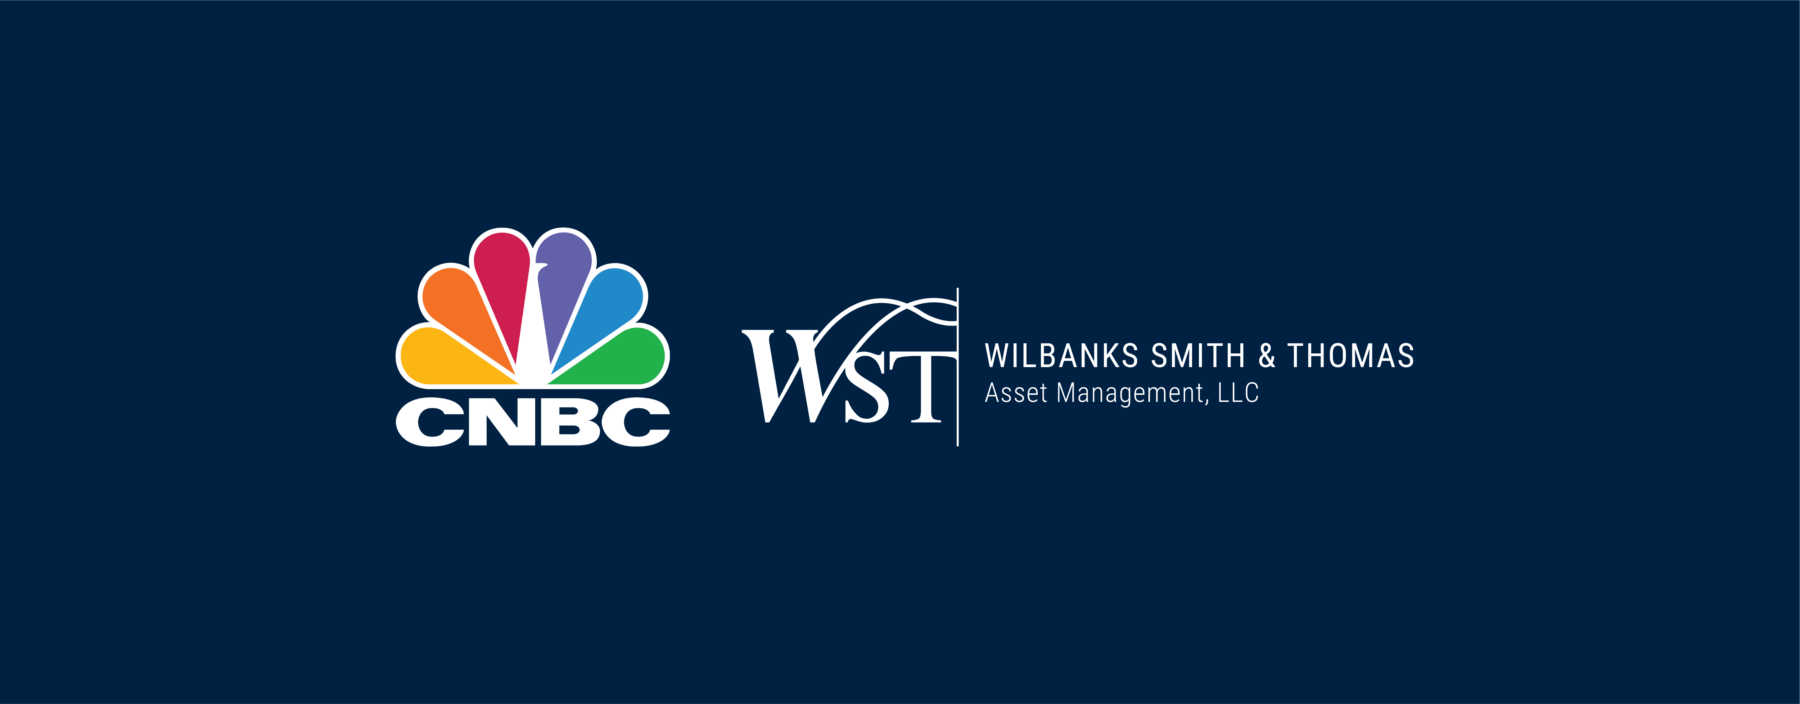 Wilbanks Smith & Thomas Recognized as a Top Financial Advisor by CNBC